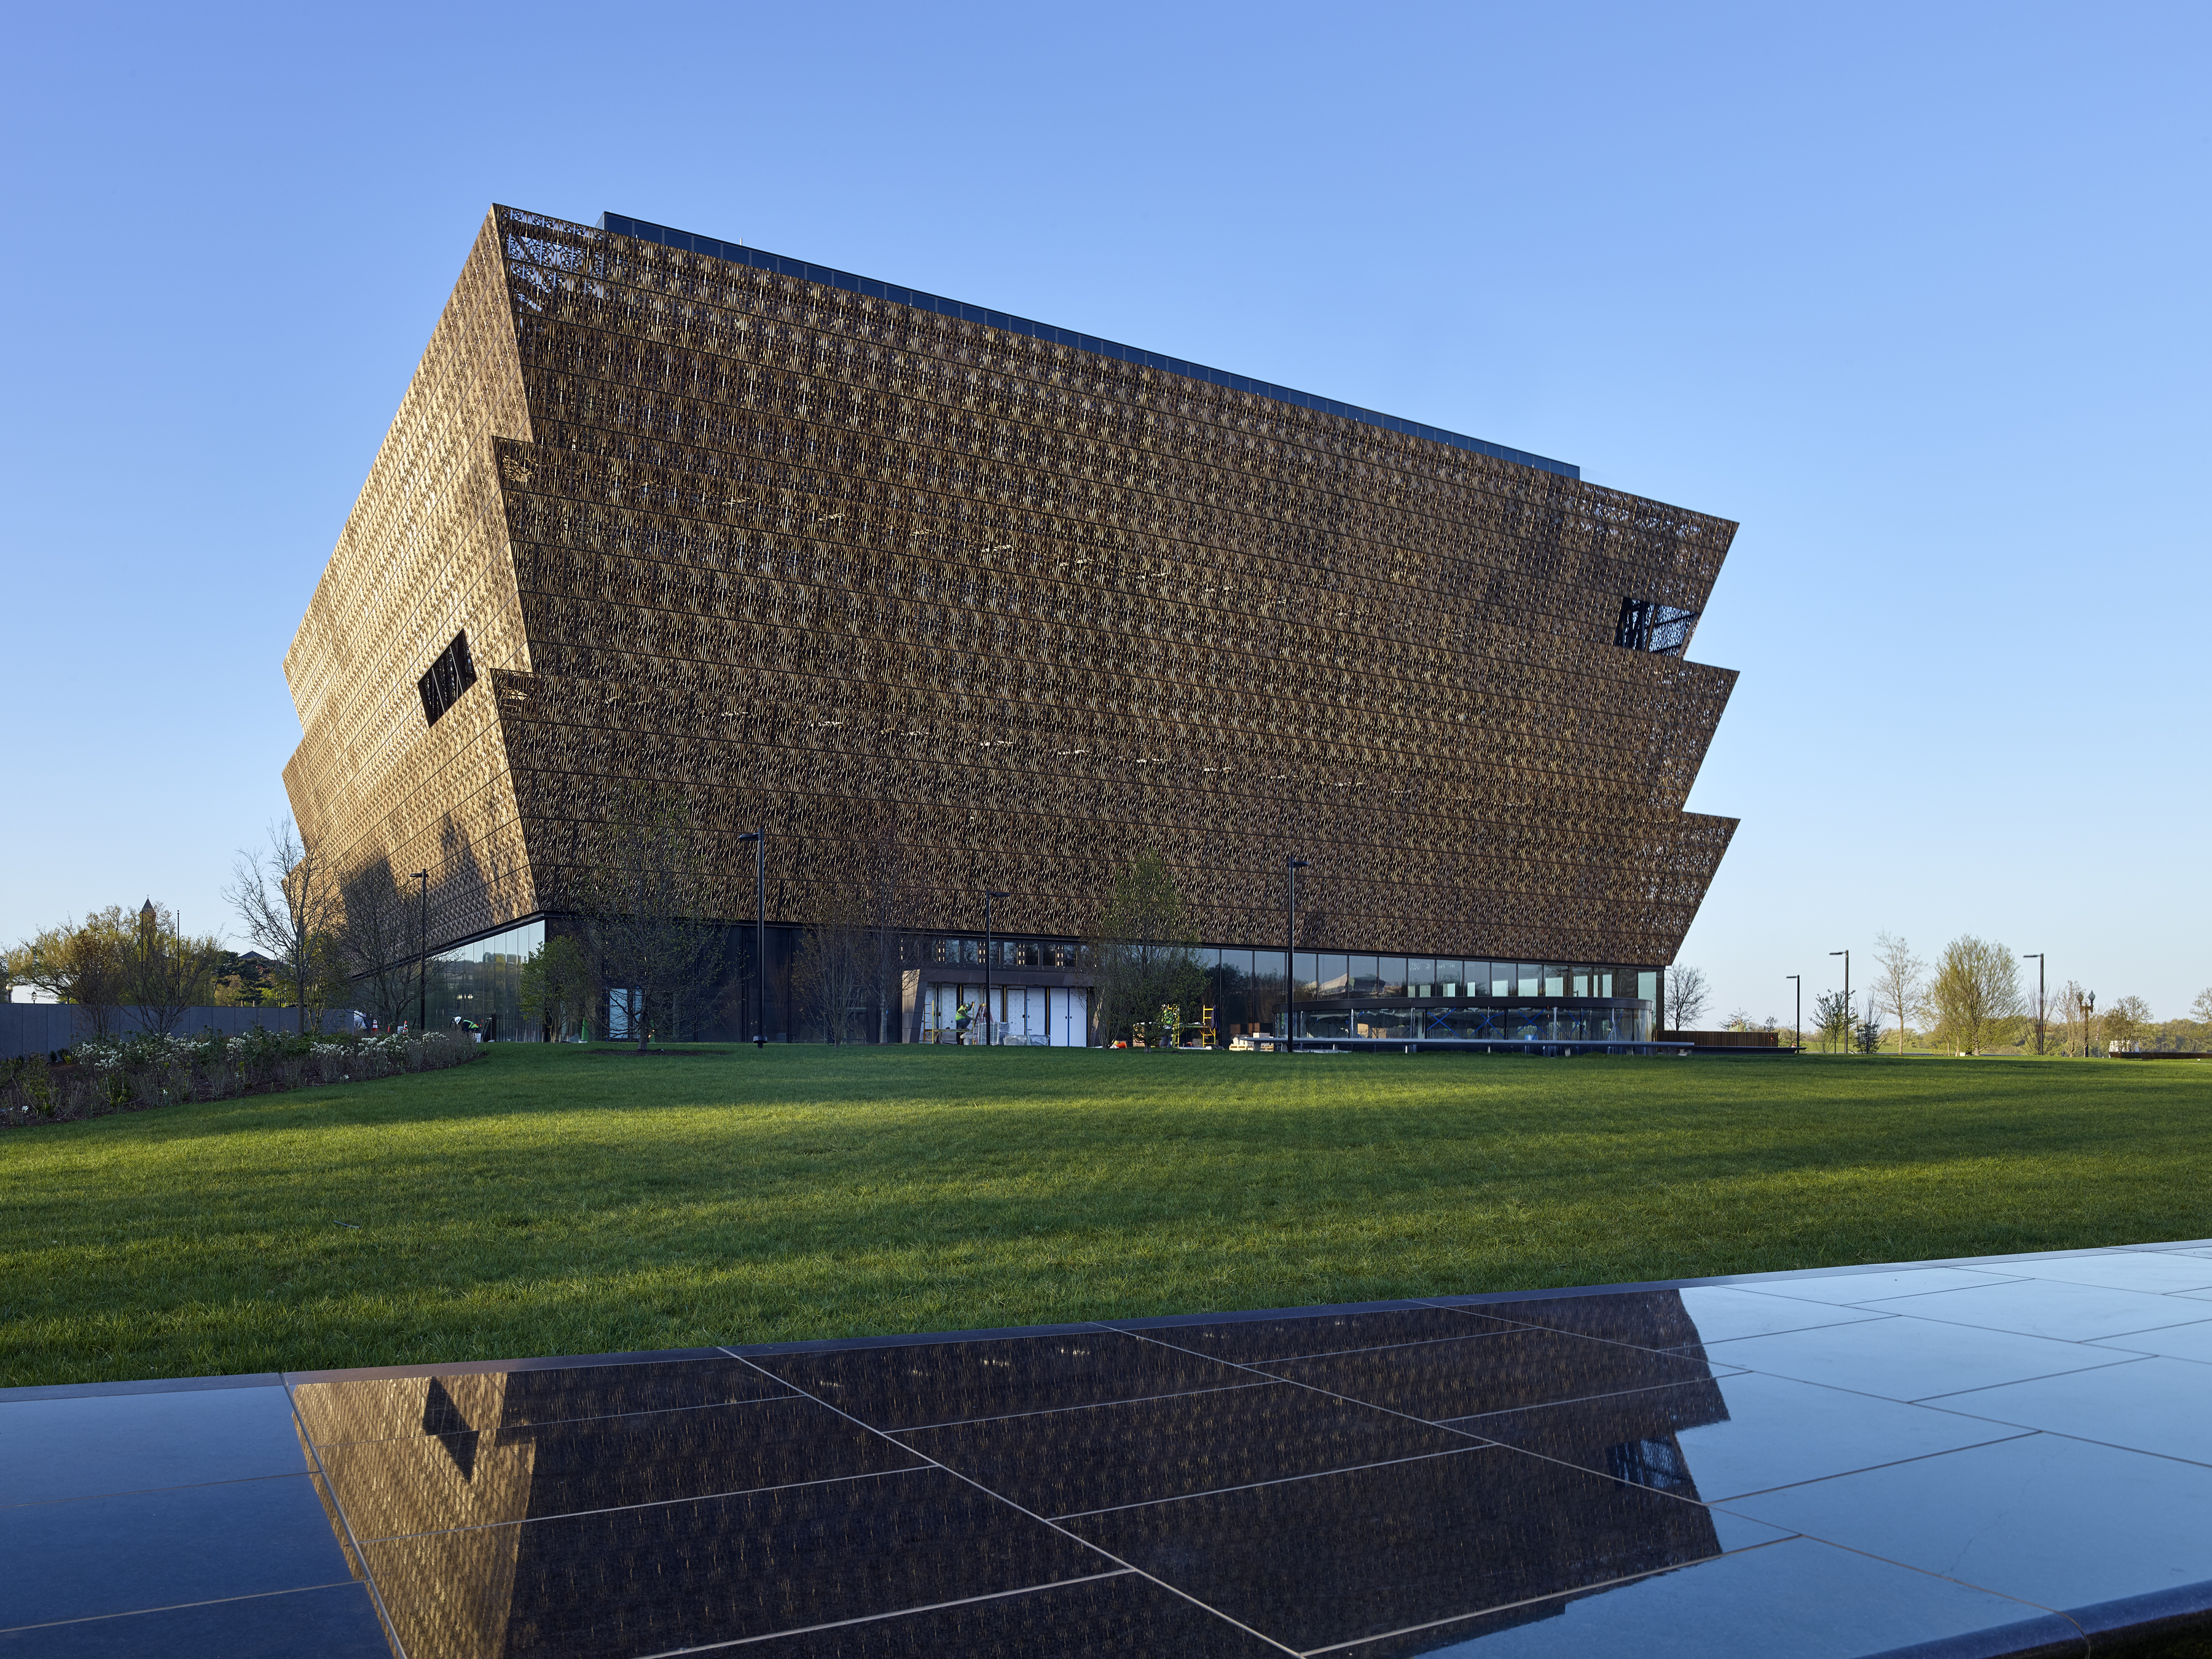 The National Museum of African American History & Culture